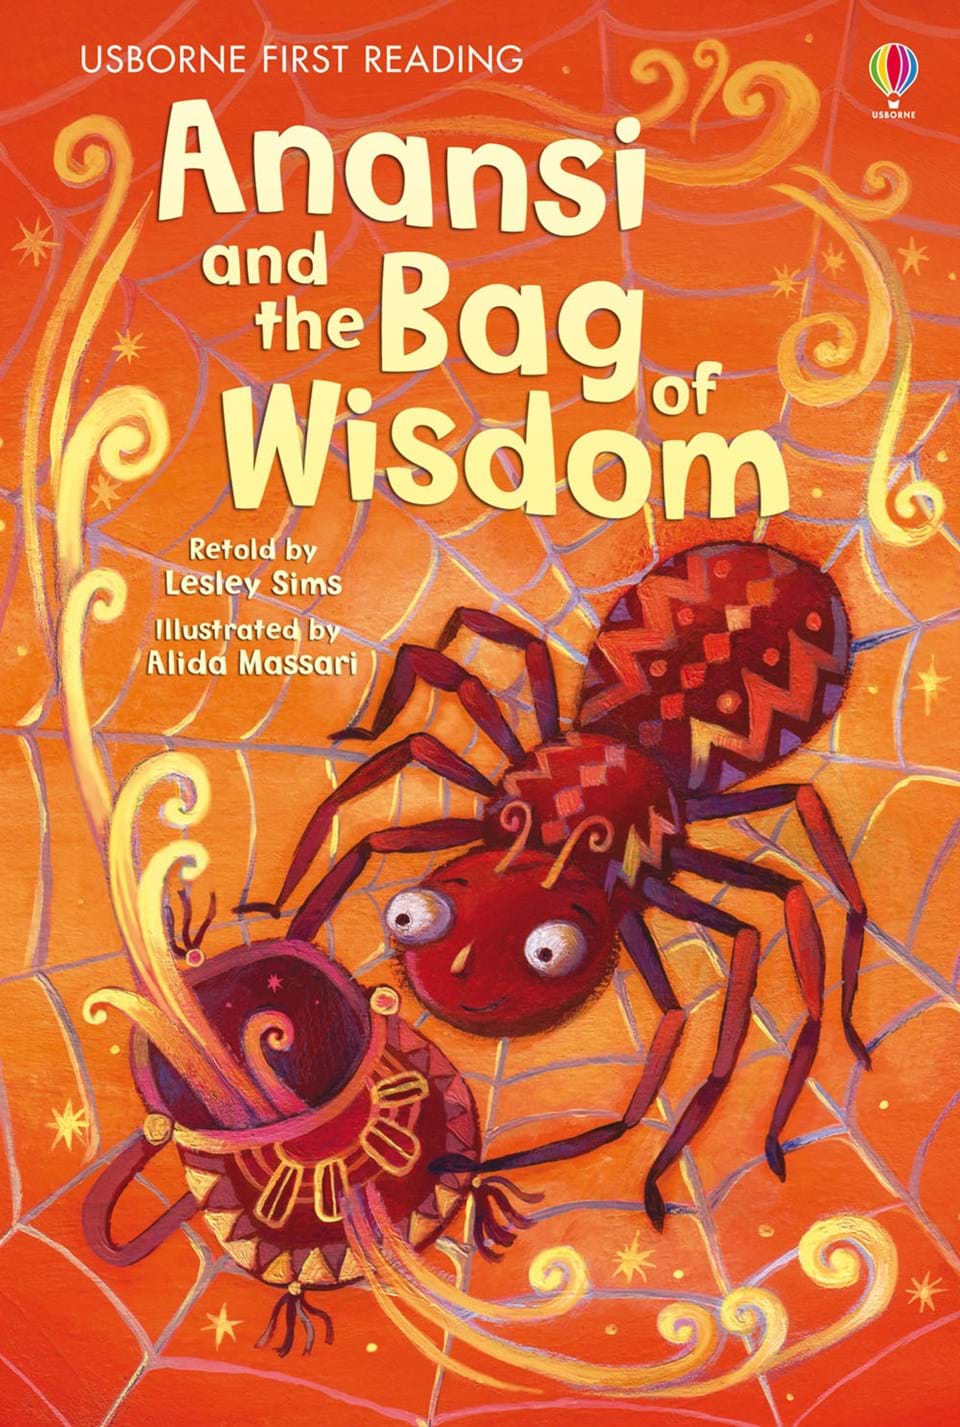 Usborne First Reading: Anasi and the Bag of Wisdom (Level 1)